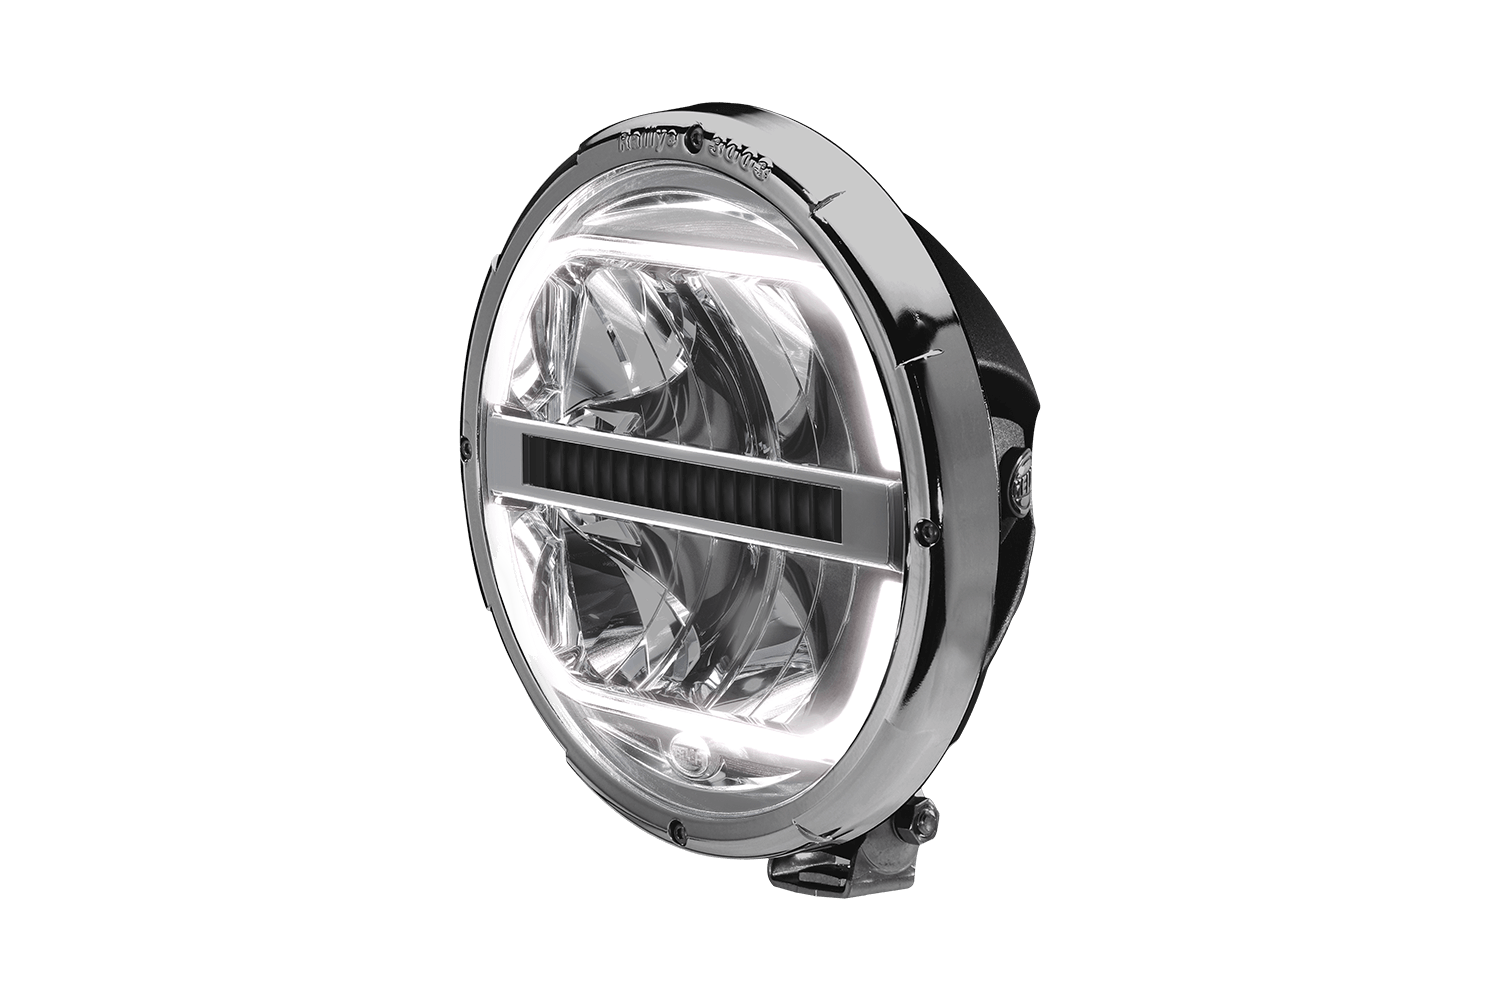 Rallye 3003 LED Auxiliary High Beam auxiliary headlamp from Hella offered by Patlon